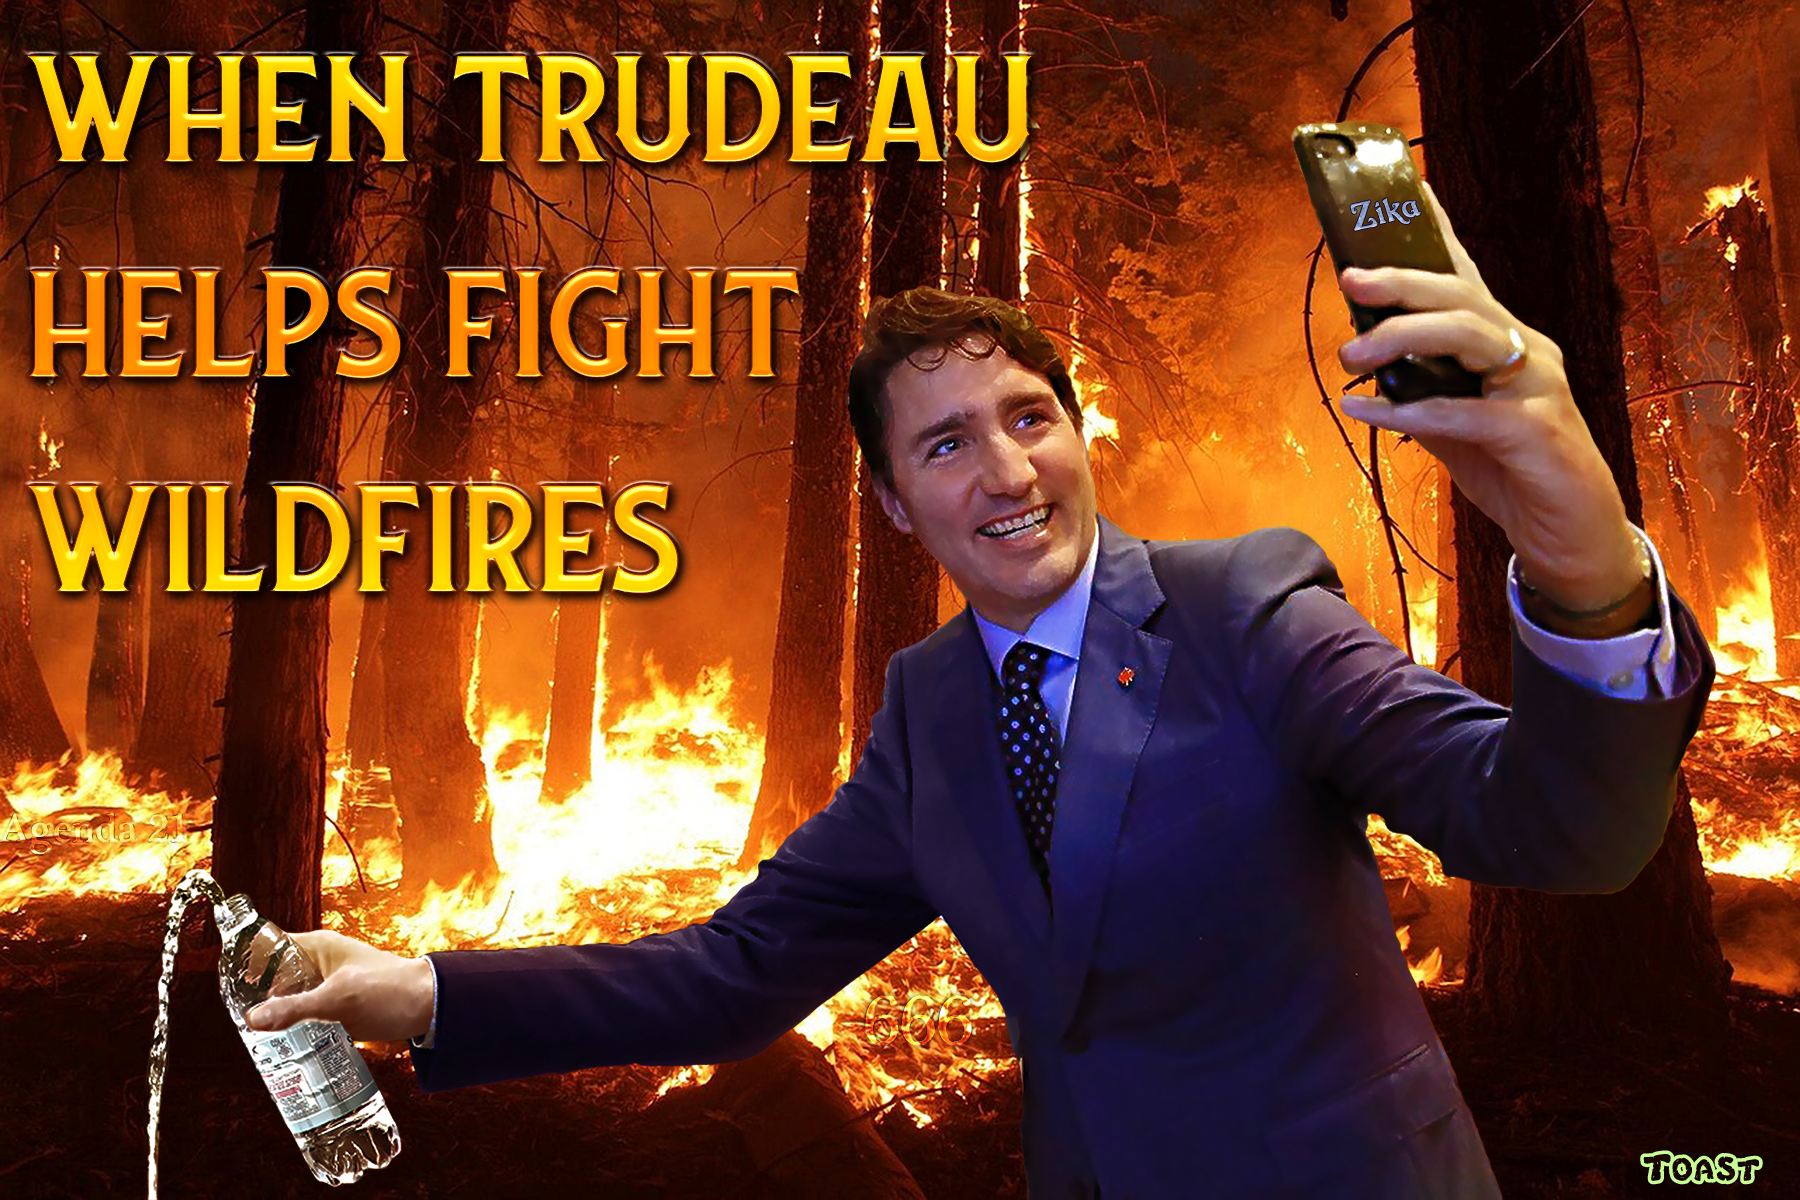 Trudeau Fights Wildfires. Blank Meme Template